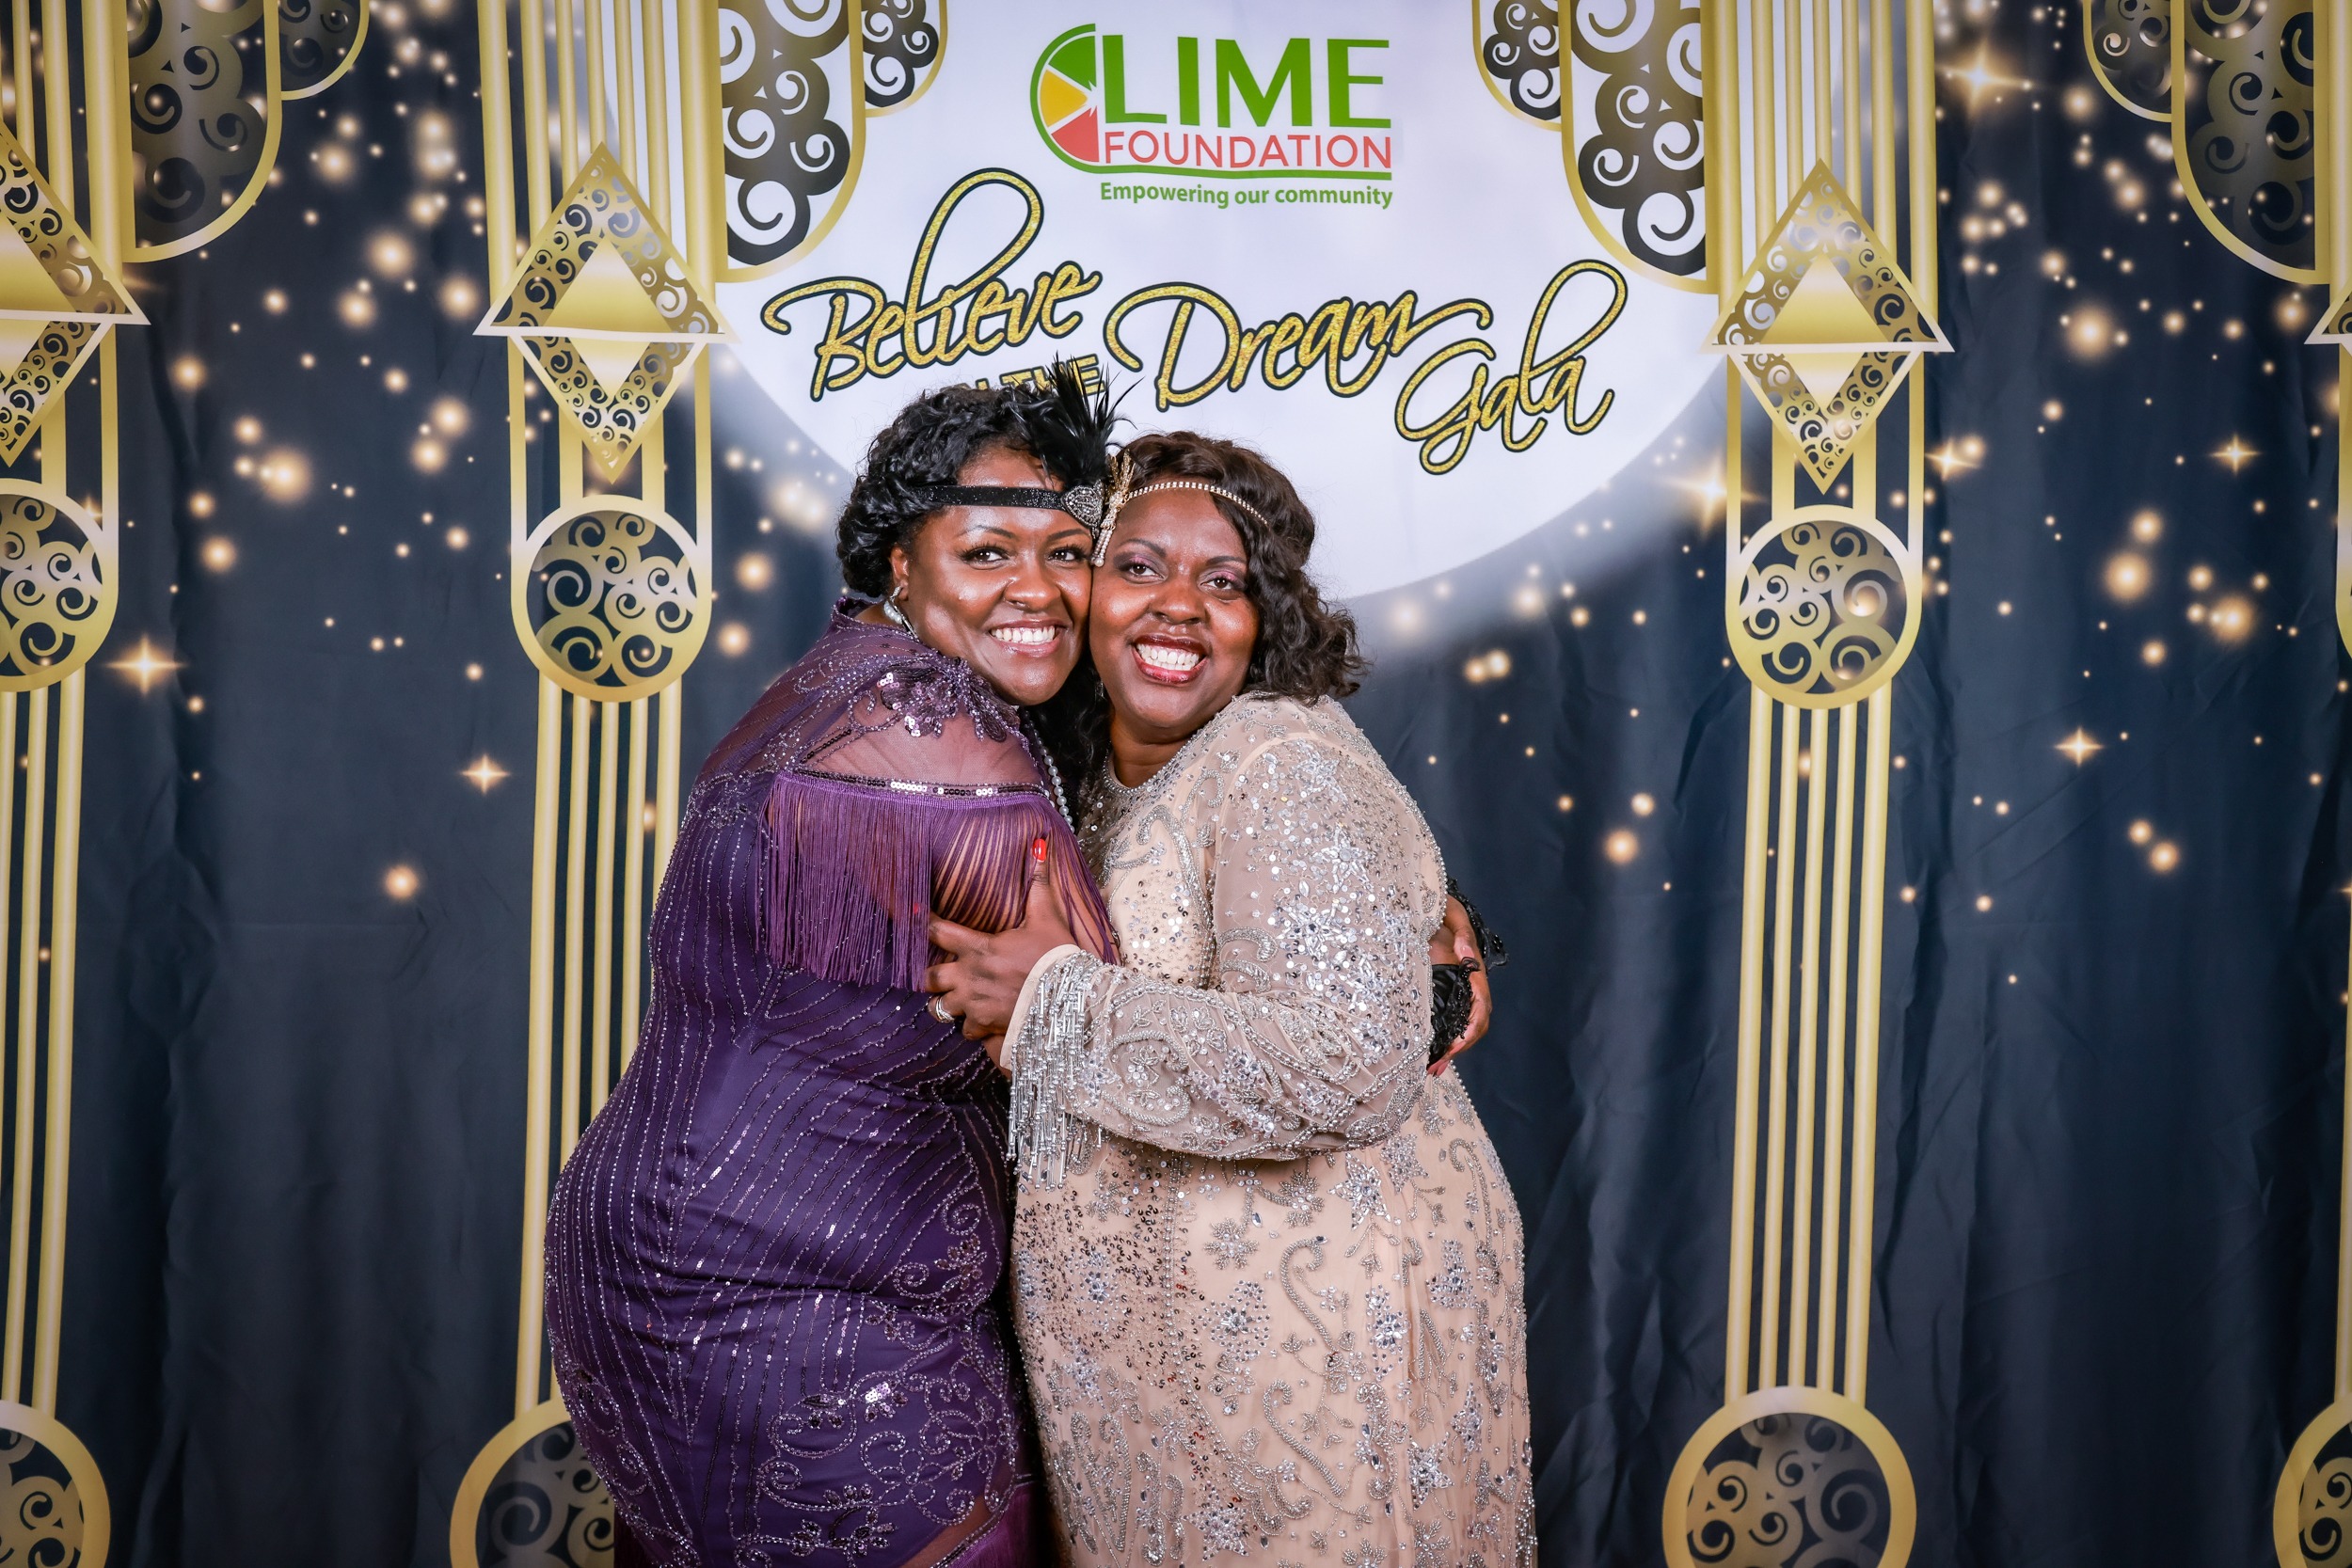 Two women posing for a photo at a party hosted by The LIME Foundation of Santa Rosa in Sonoma County.